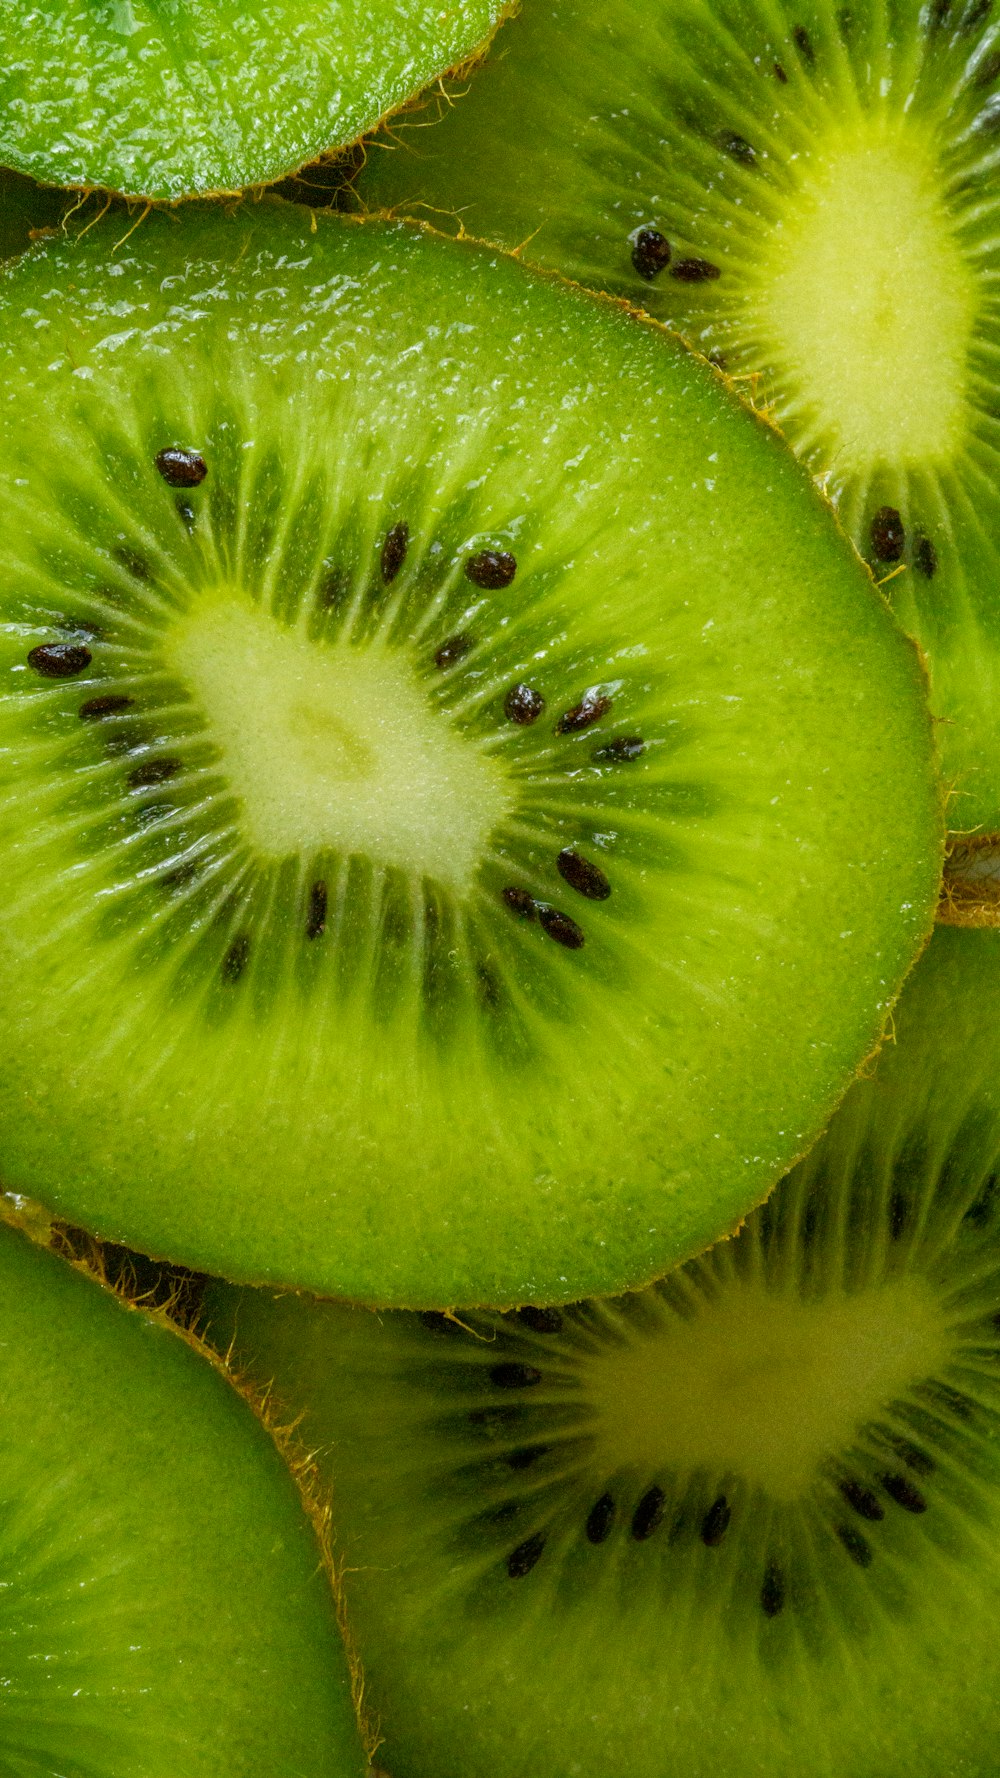 a close up of a kiwi fruit sliced in half